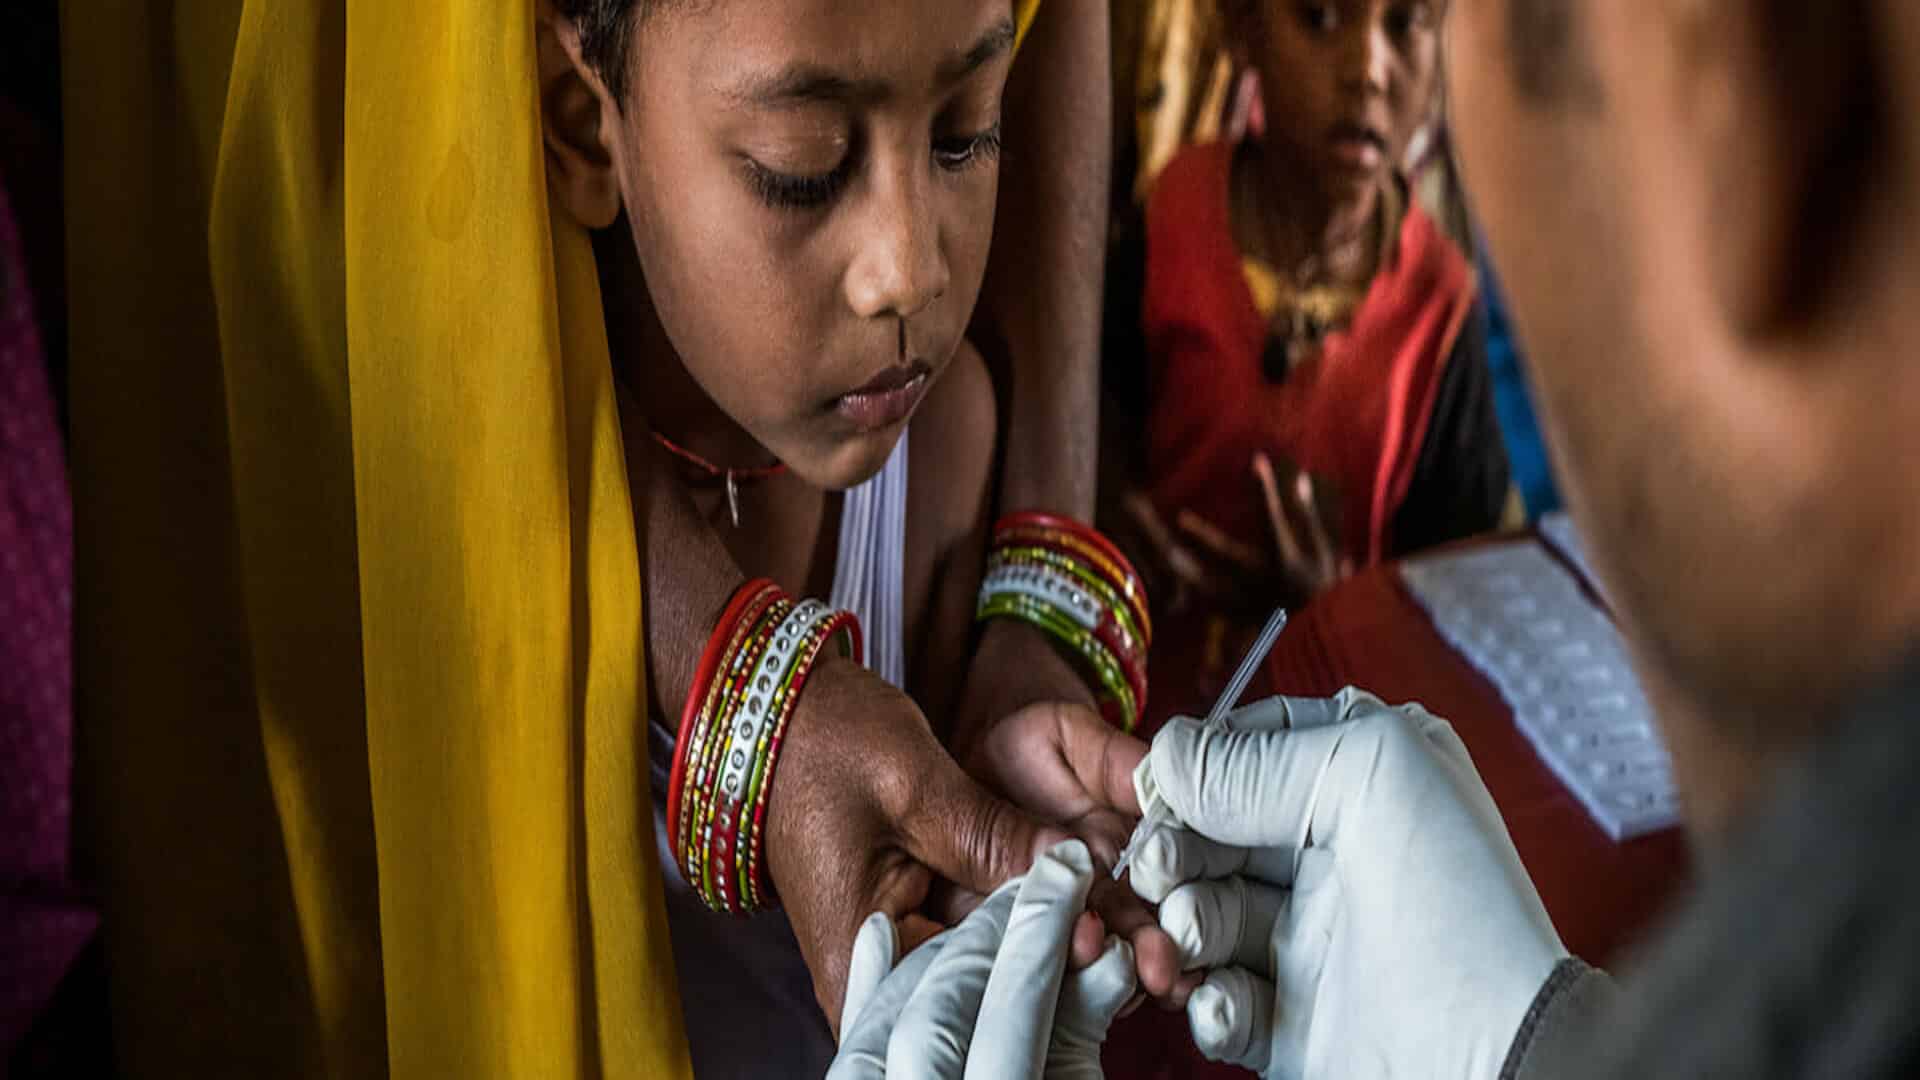 India pledges to end malaria by 2030, elimination program in motion